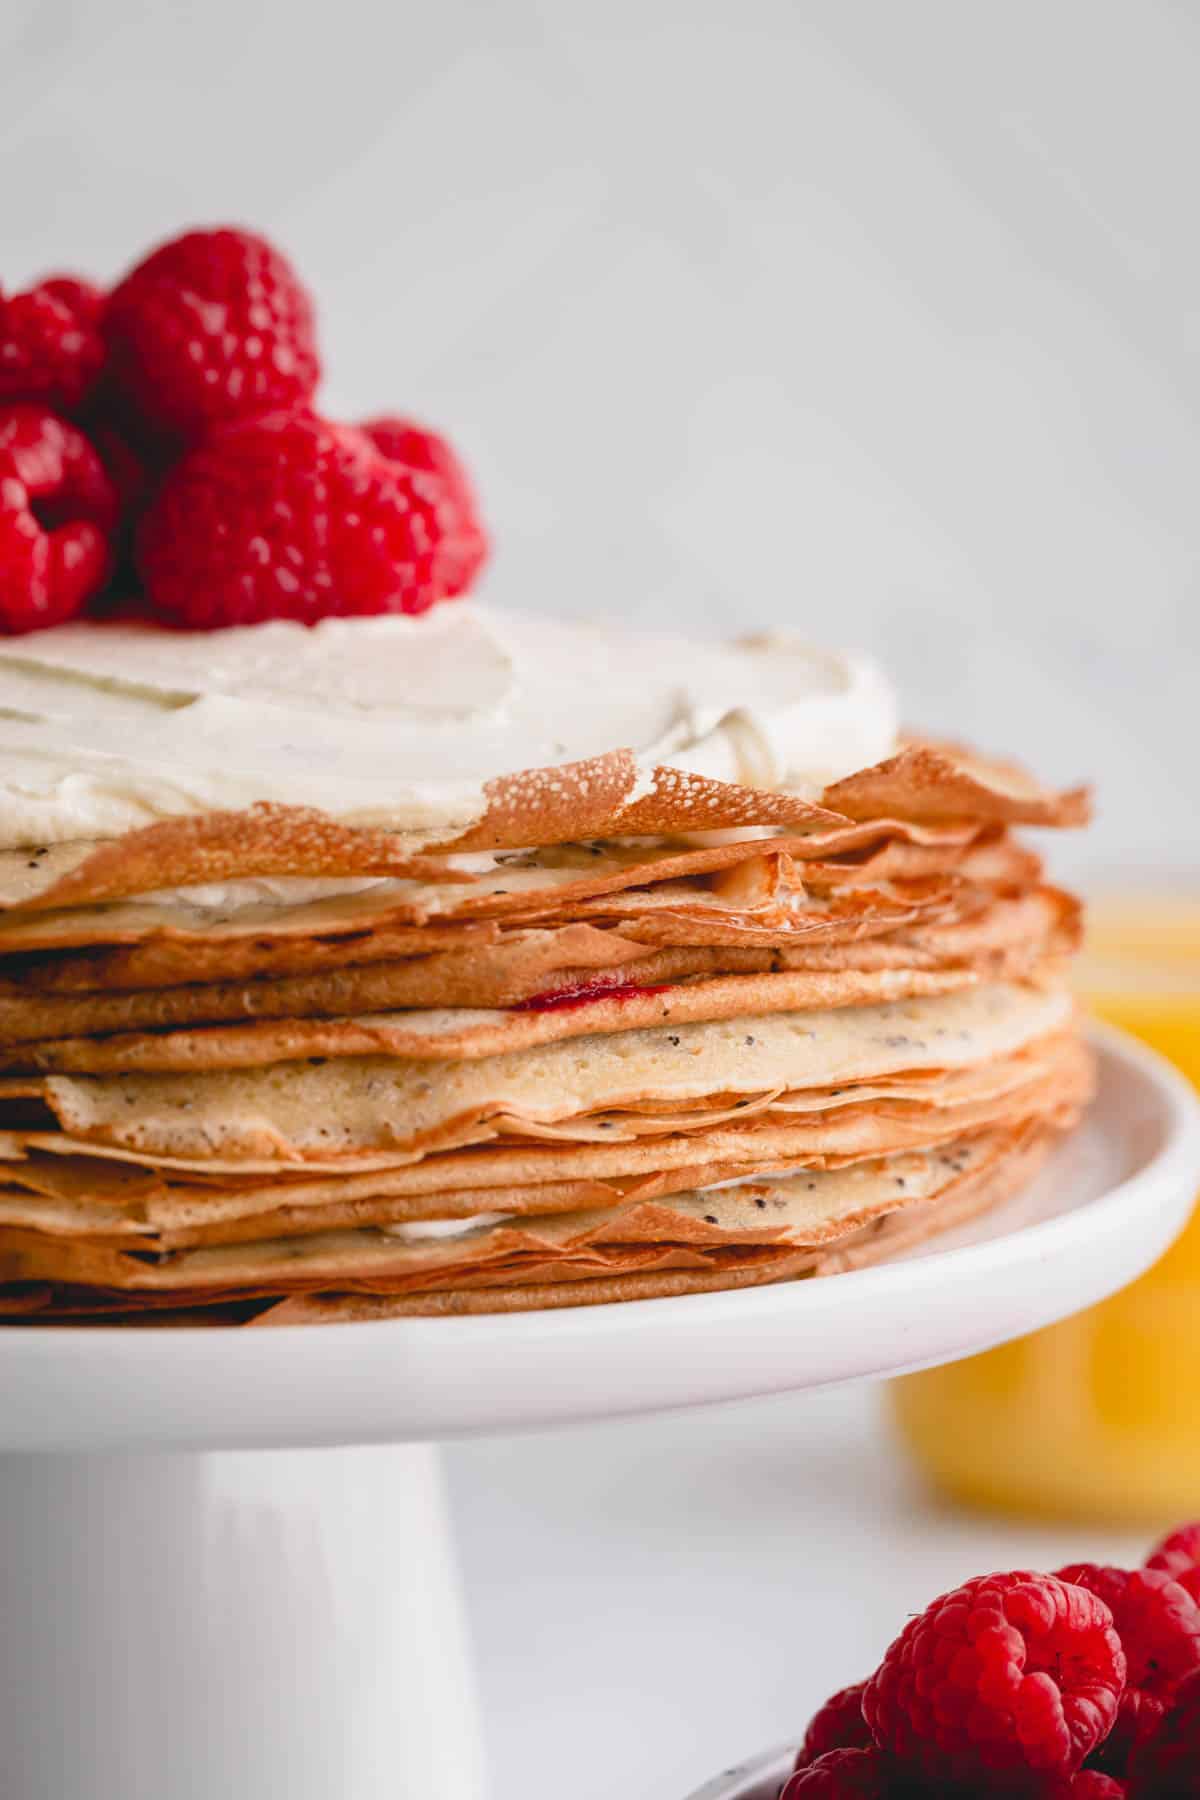 a whole crepe cake with whipped cream and raspberries on top.